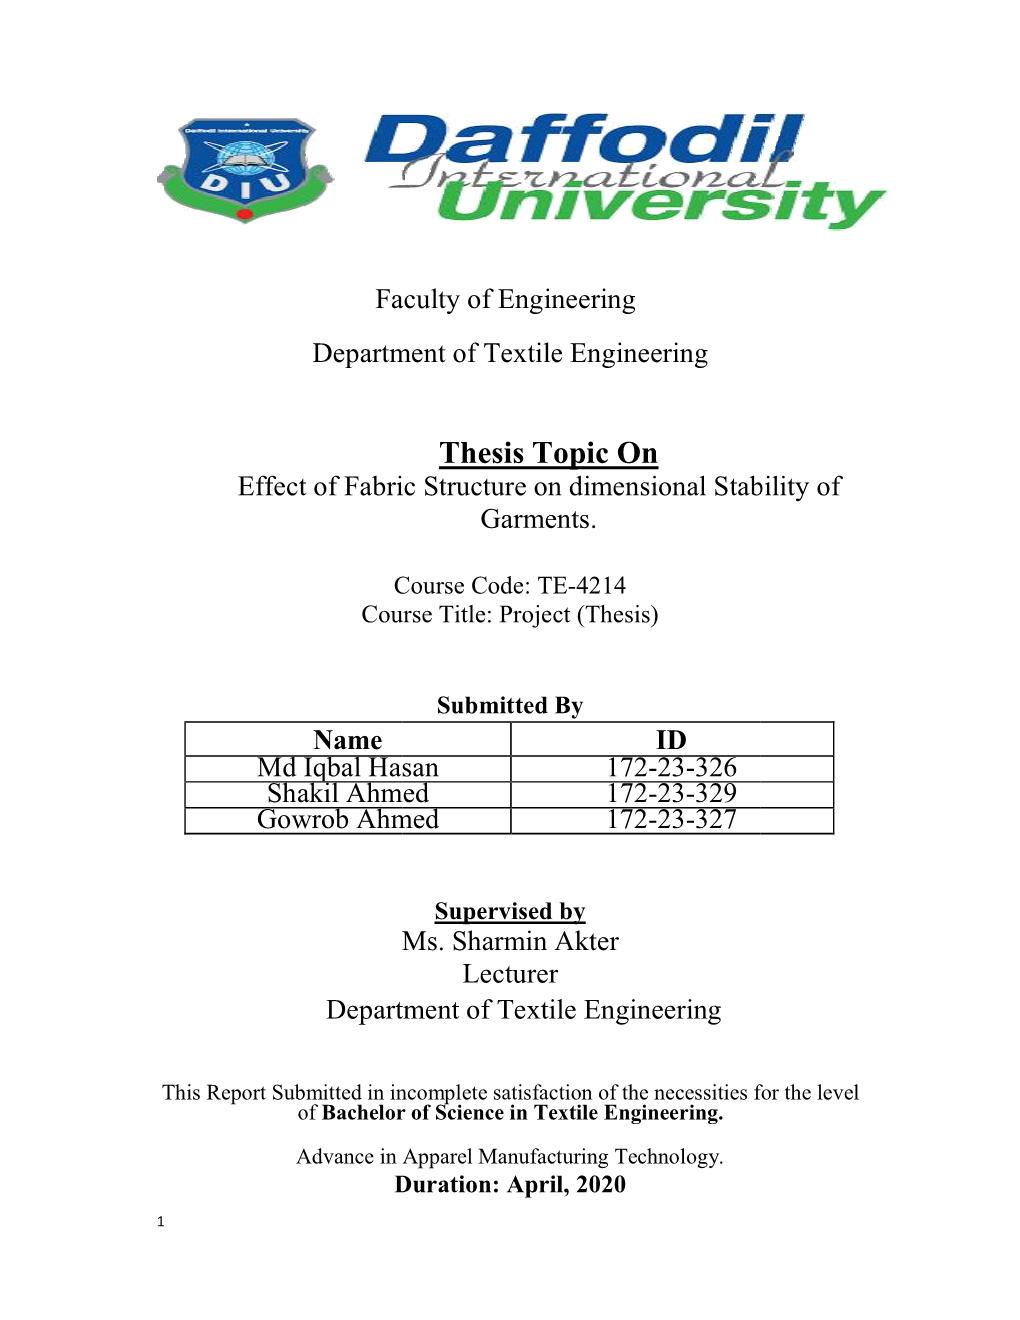 Thesis Topic on Effect of Fabric Structure on Dimensional Stability of Garments